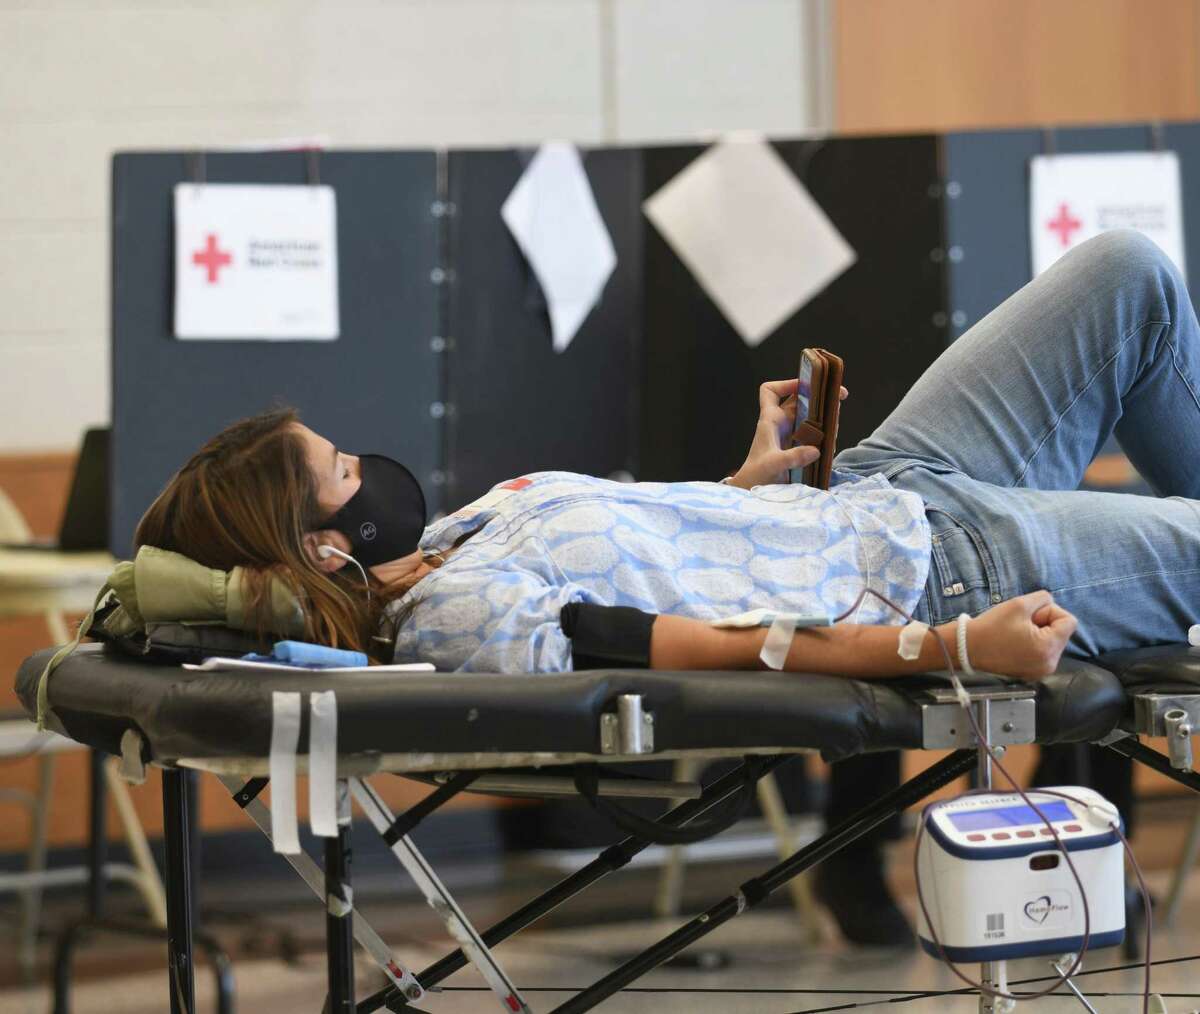 Darien's Allison Gasvoda donates blood during the blood drive at First Presbyterian Church in Stamford, Conn. Monday, Oct. 18, 2021. The next Stamford blood drive will be held at Archangels Greek Orthodox Church on Saturday, Oct. 23.